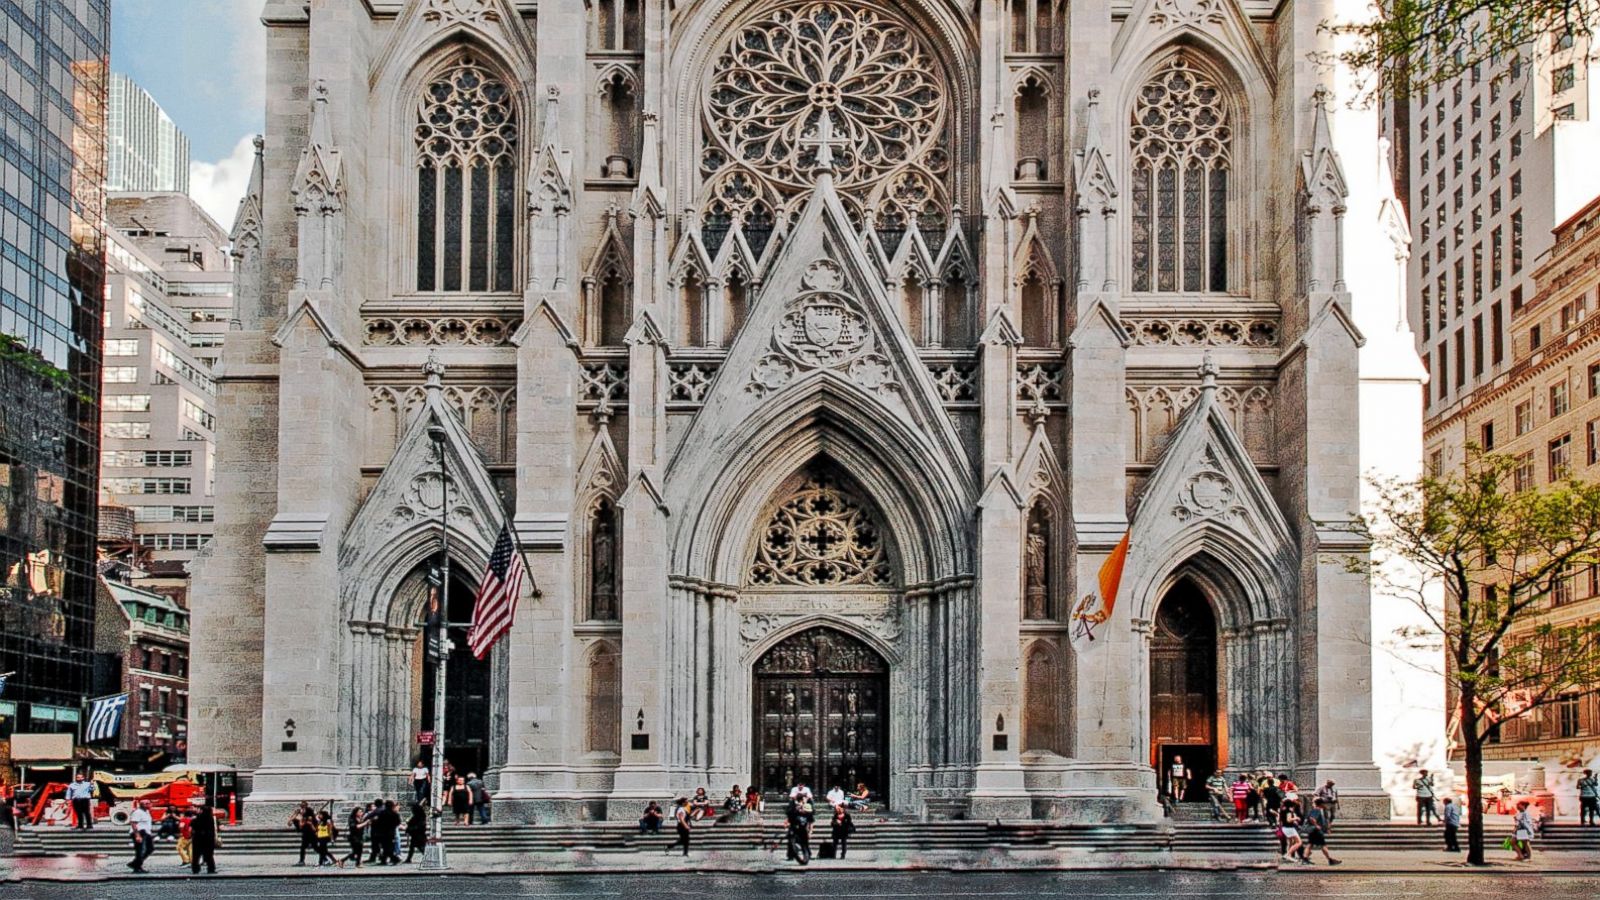 Man arrested after approaching historic St. Patrick's Cathedral with gas  cans, light fluid - ABC News